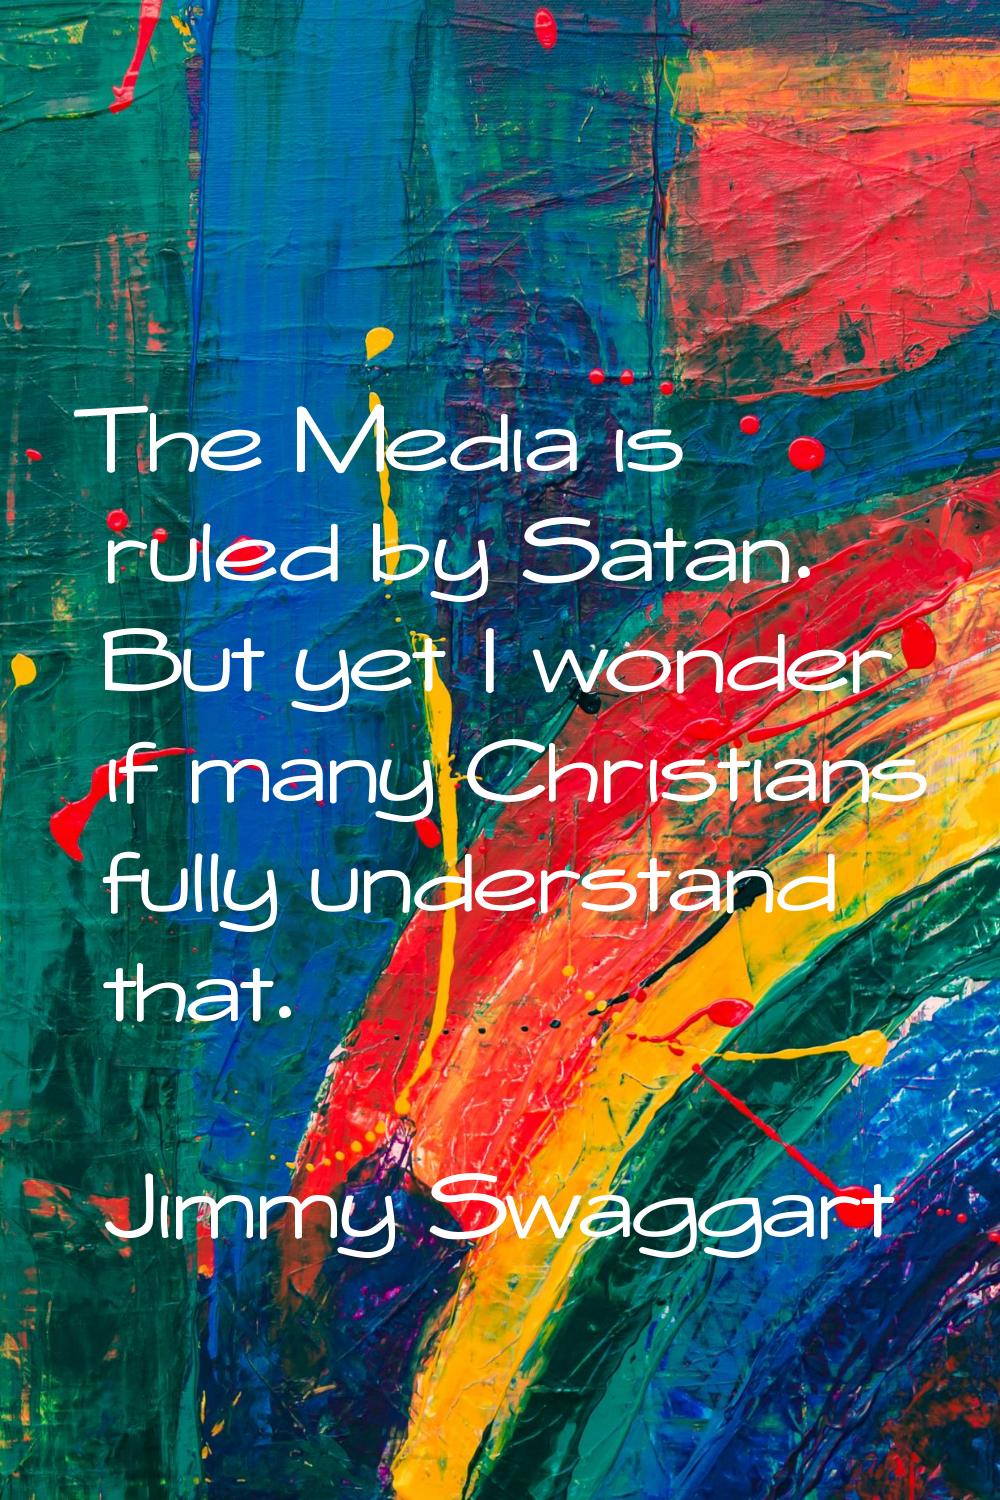 The Media is ruled by Satan. But yet I wonder if many Christians fully understand that.